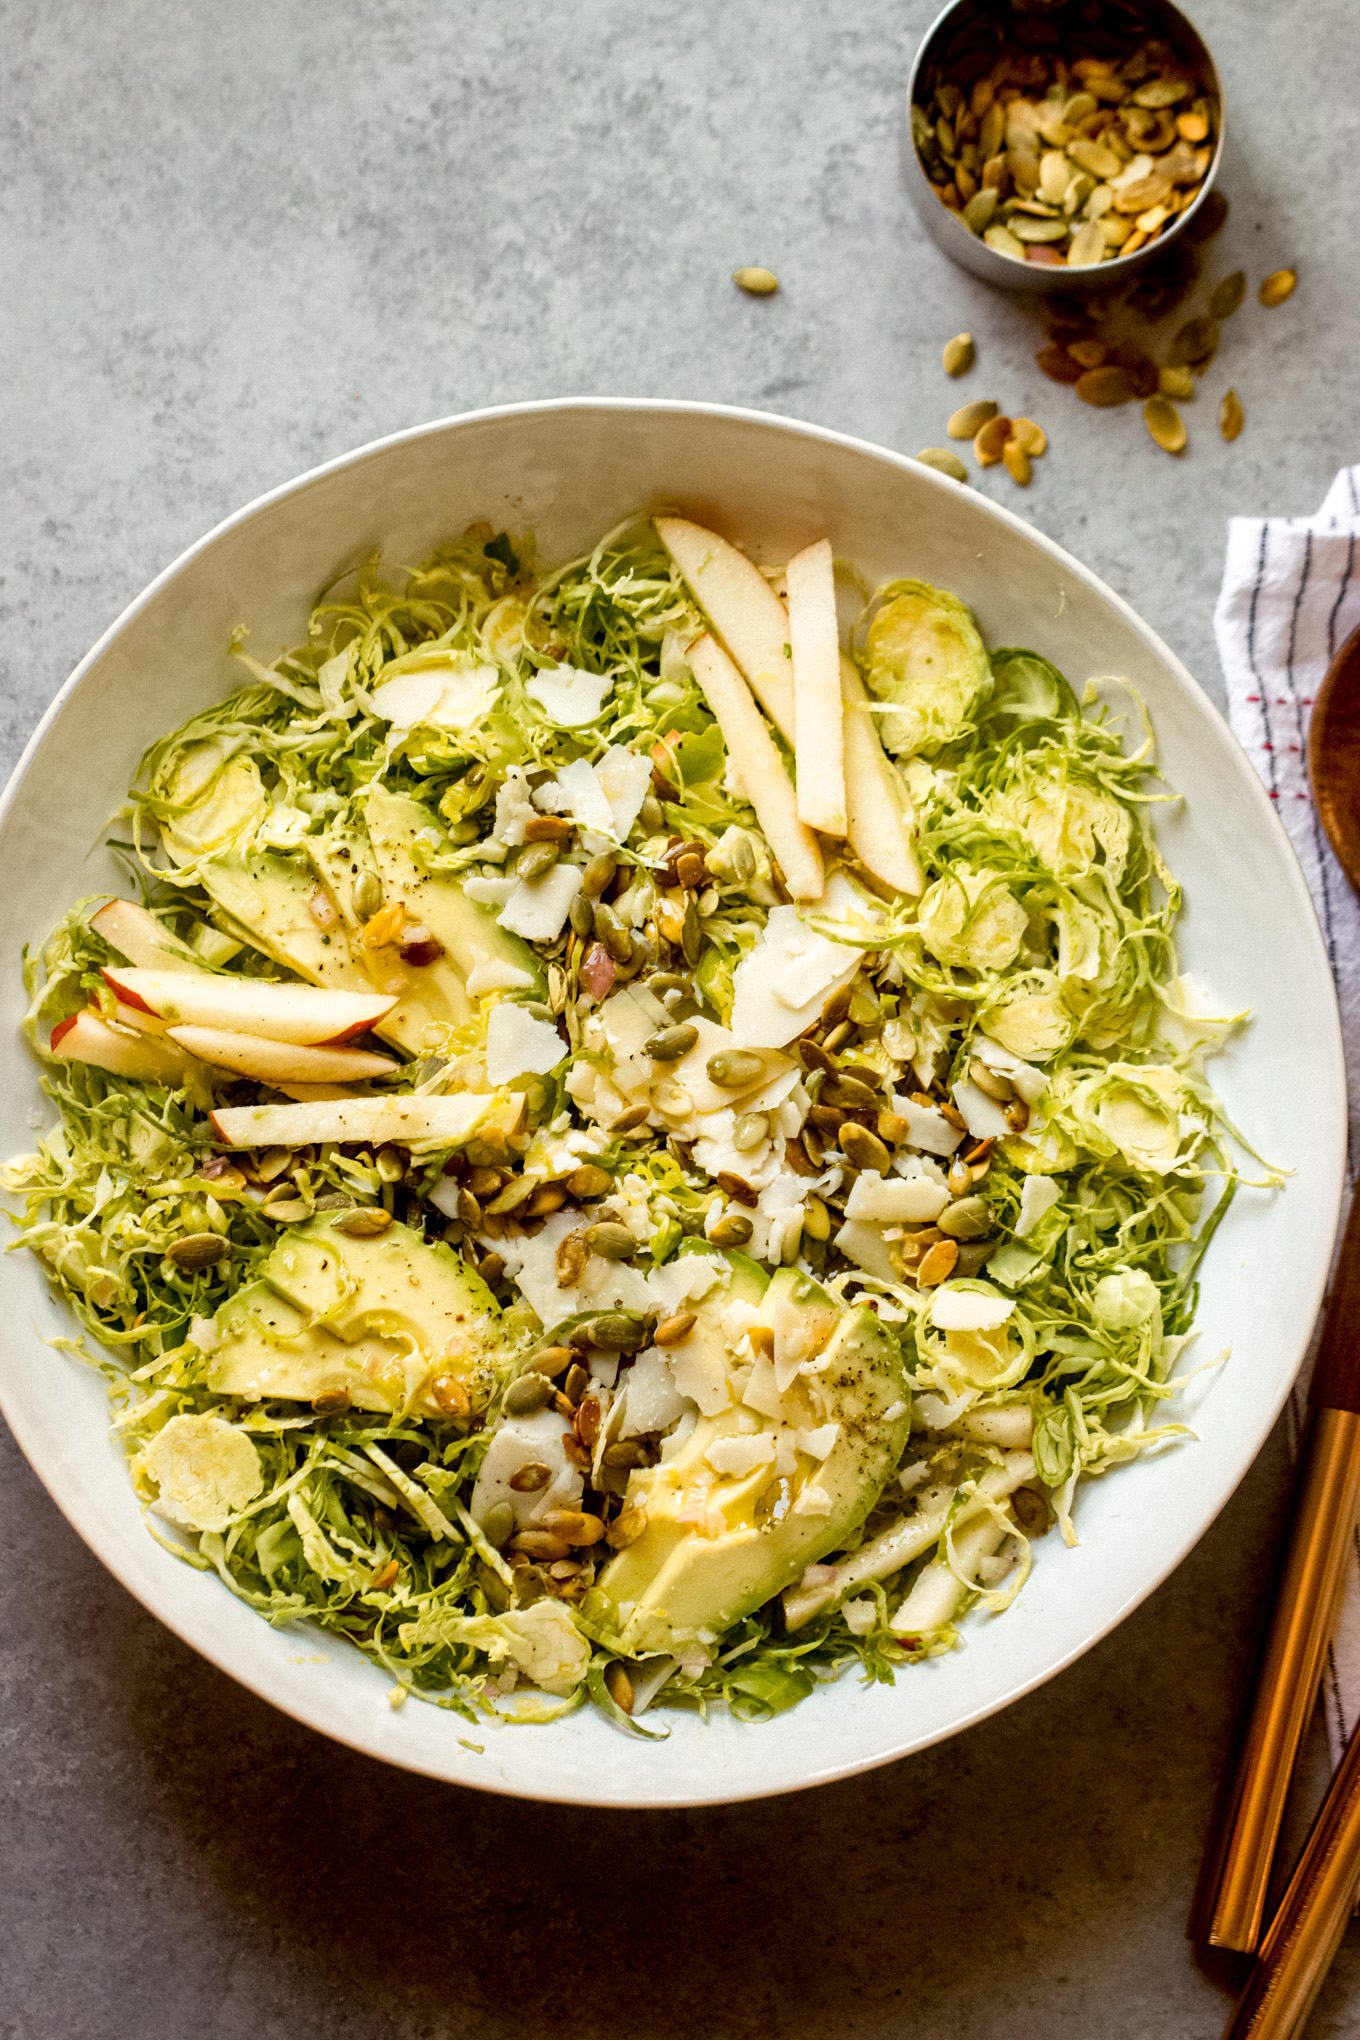 shredded Brussels sprouts salad in a white bowl with wooden utensils on the side.